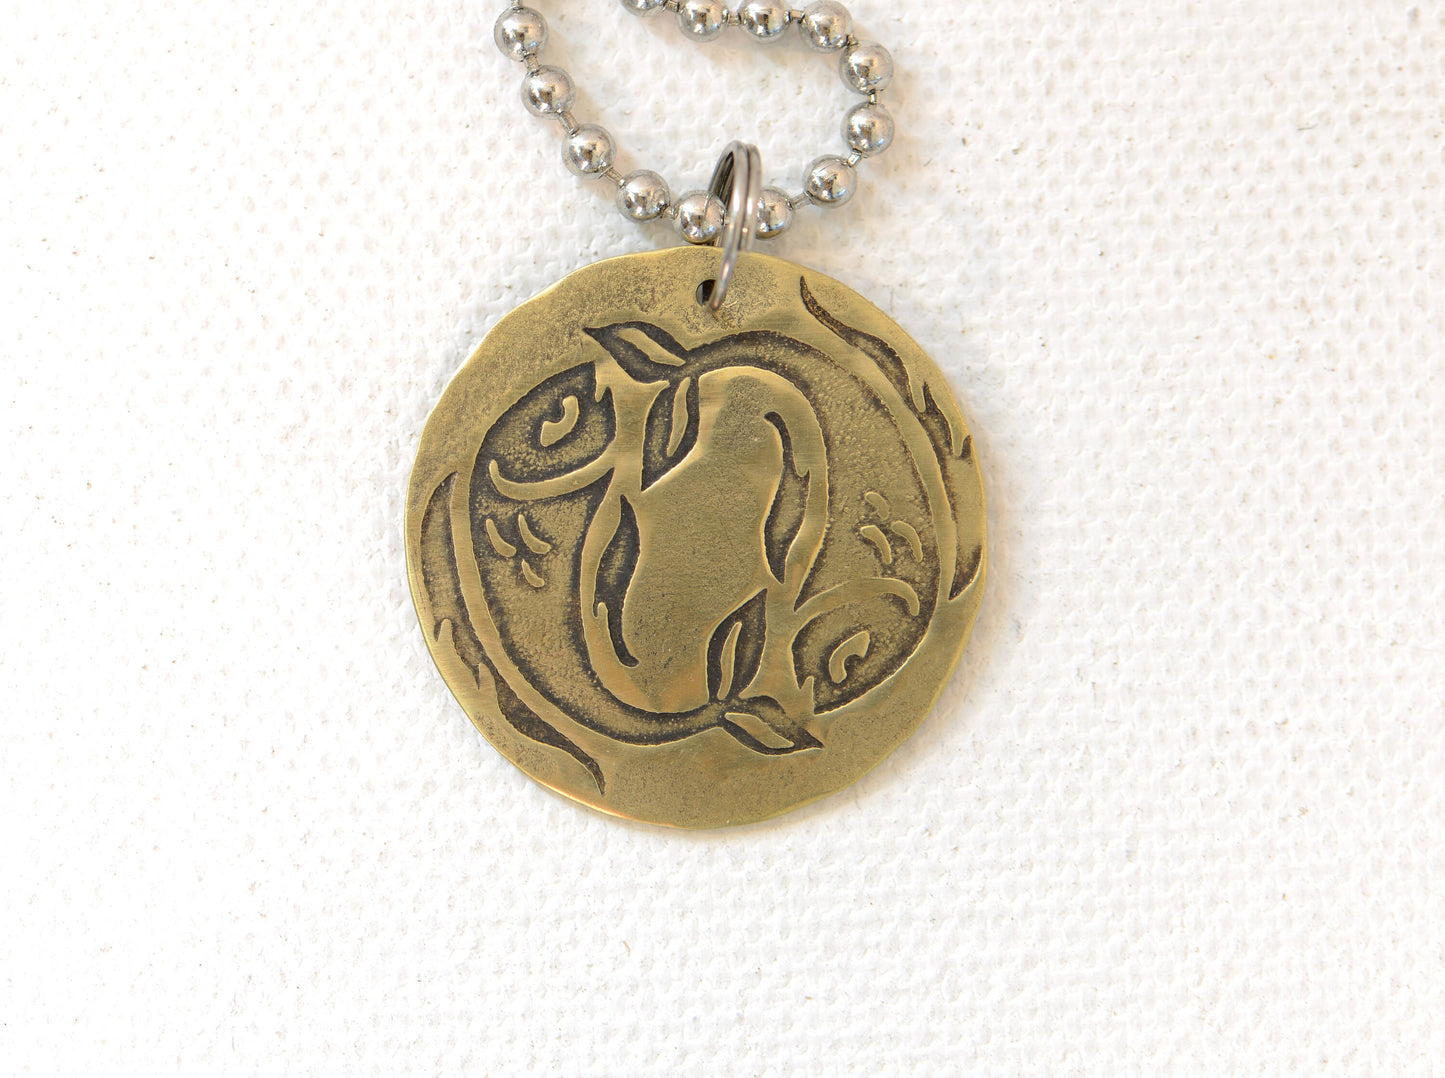 Zodiac charm style necklace shown with Pisces zodiac sign but can be personalized